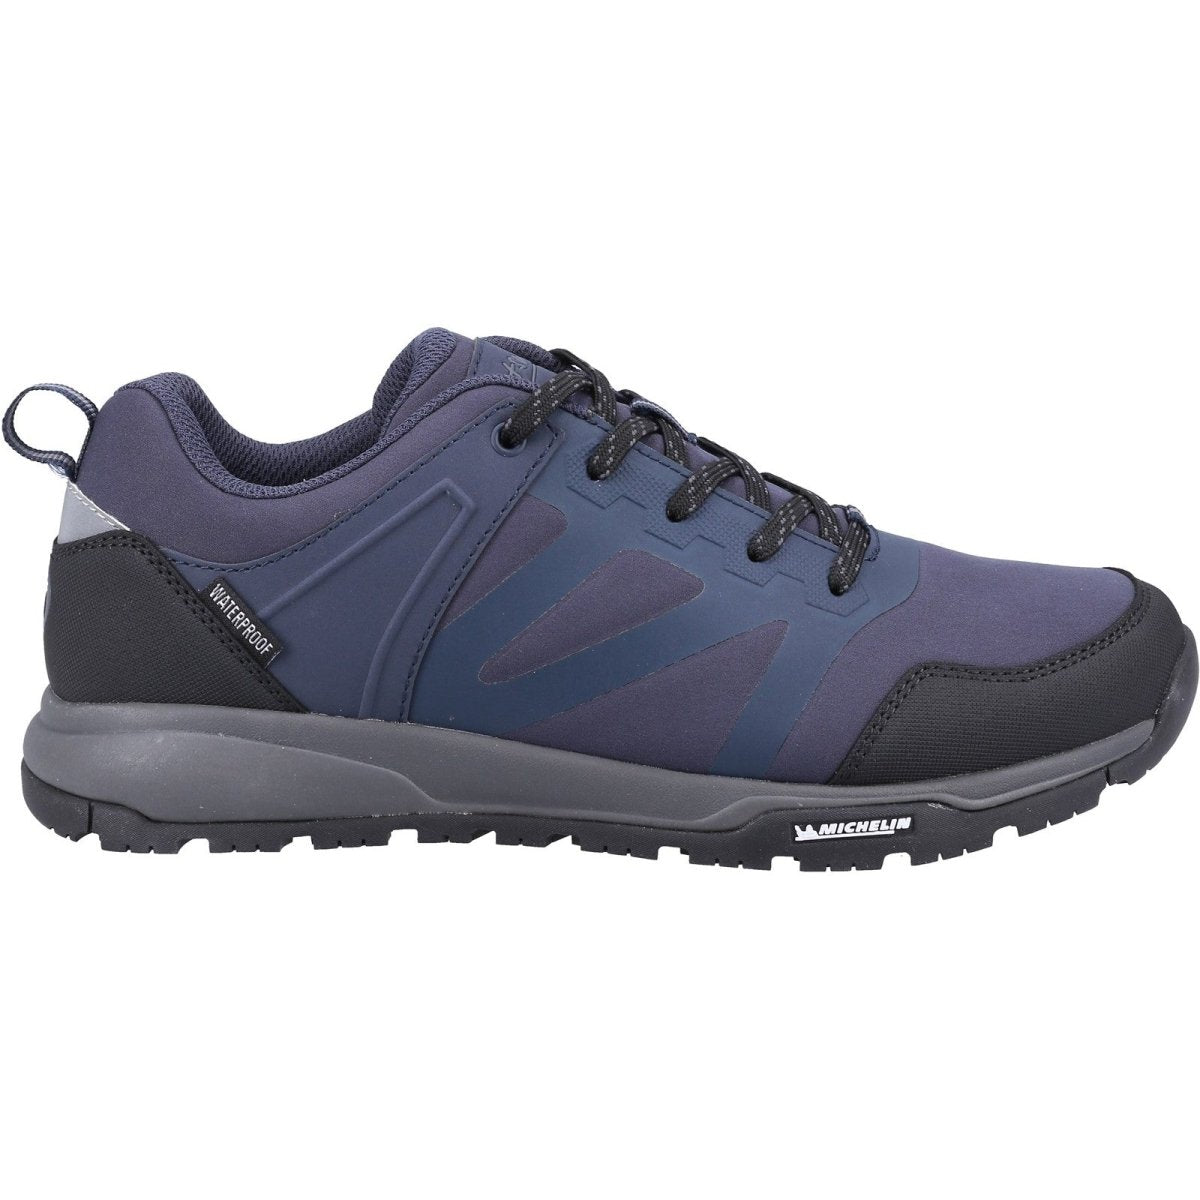 Cotswold Kingham Low Mens Waterproof Hiking Trainers - Shoe Store Direct